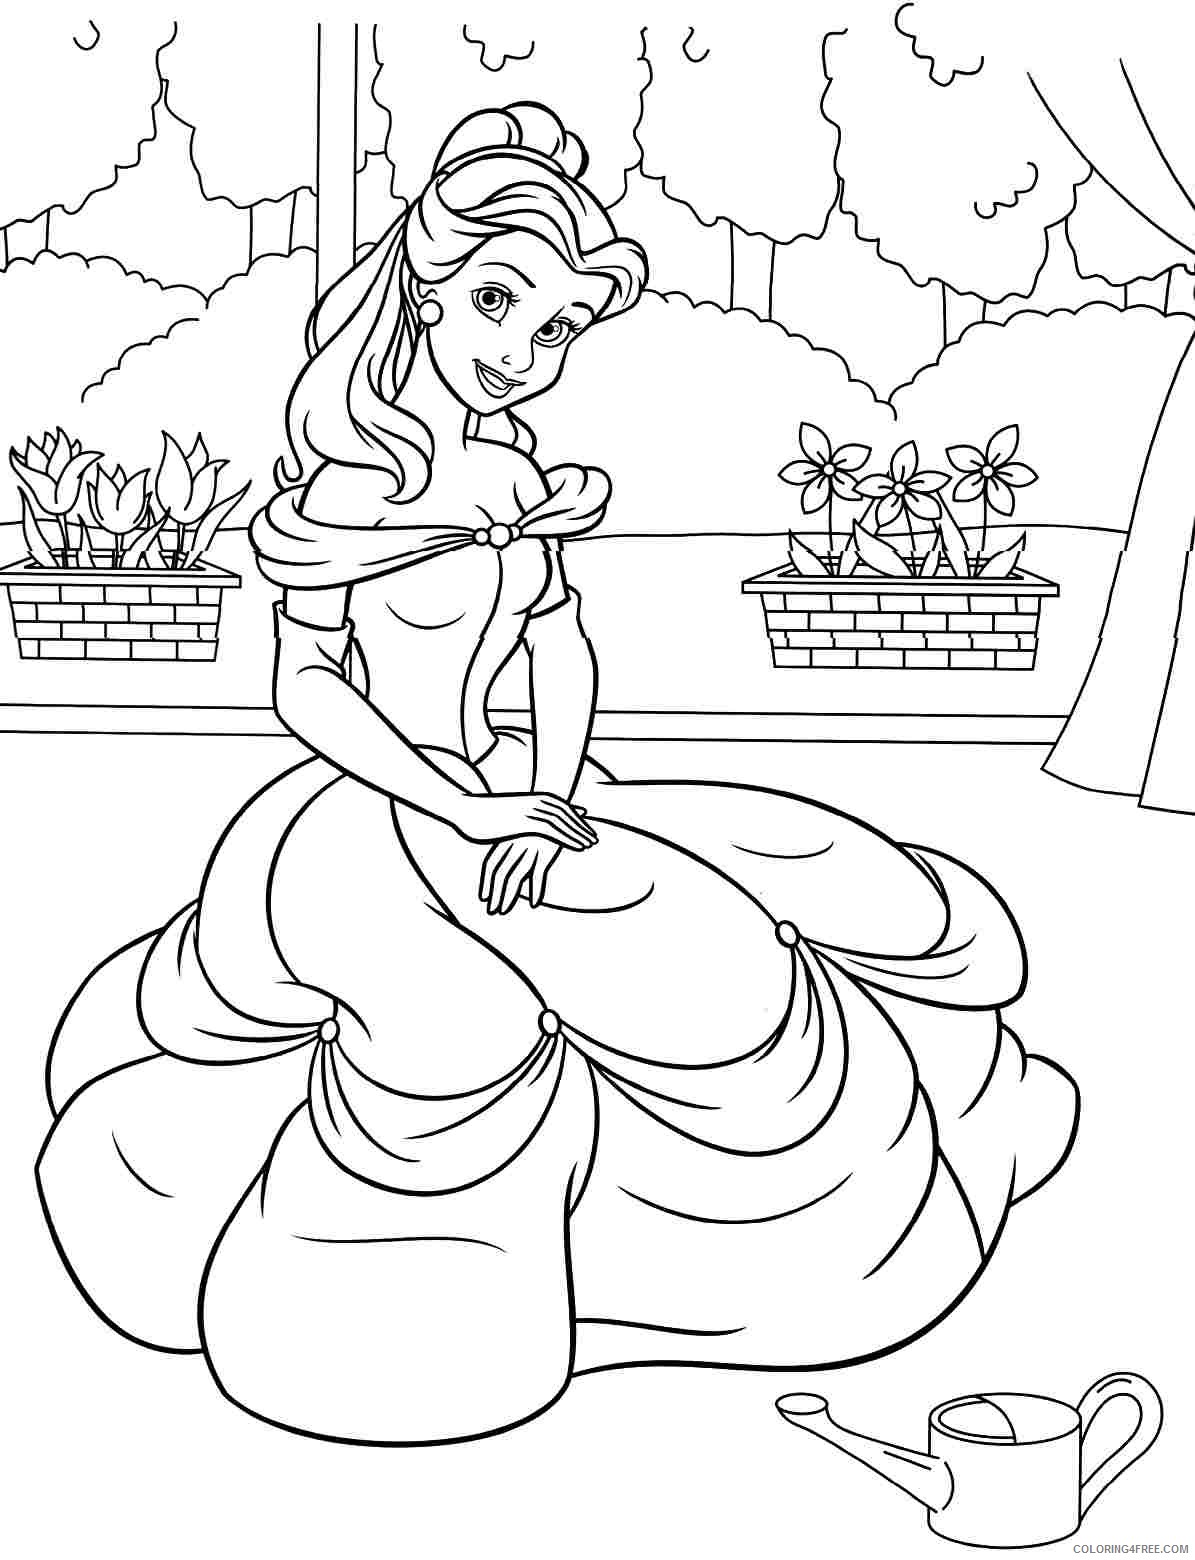 Princess Belle Coloring Pages Cartoons Disney Belle Printable 2020 5105 Coloring4free